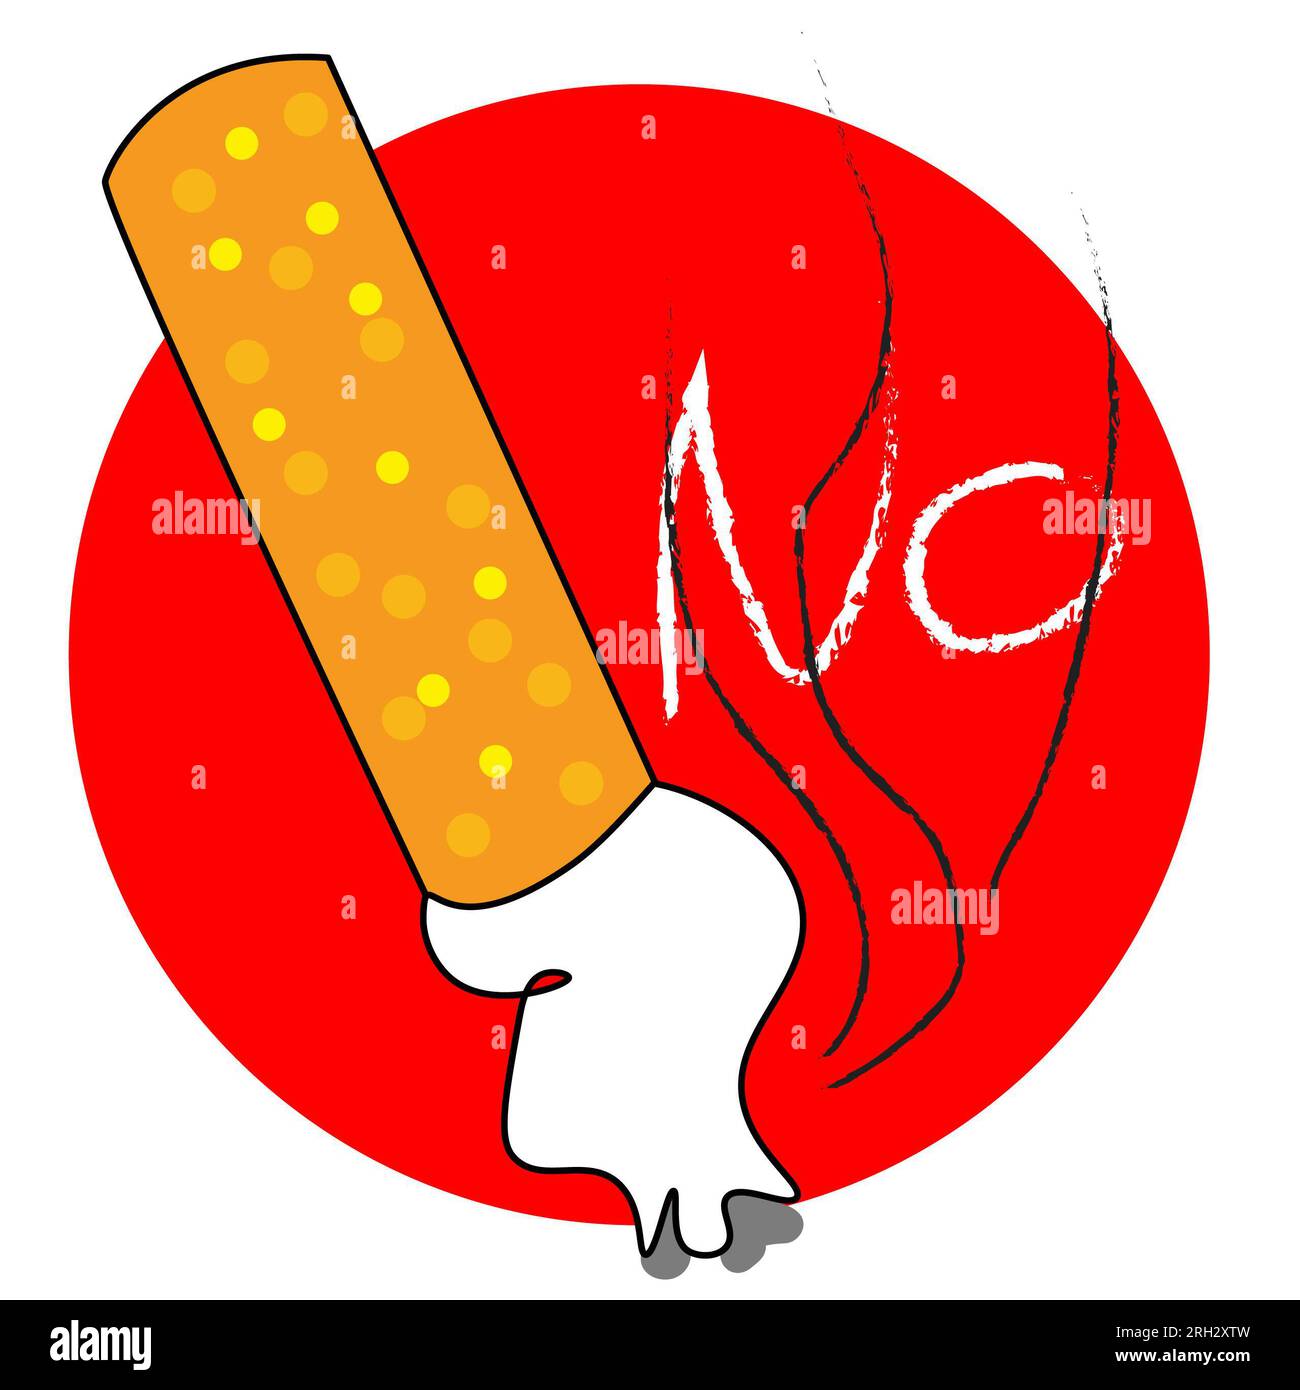 No Smoking sign with modern and simple idea, red tag, no cigarette sticker, cigarette illustration, suitable for public areas and companies Stock Photo